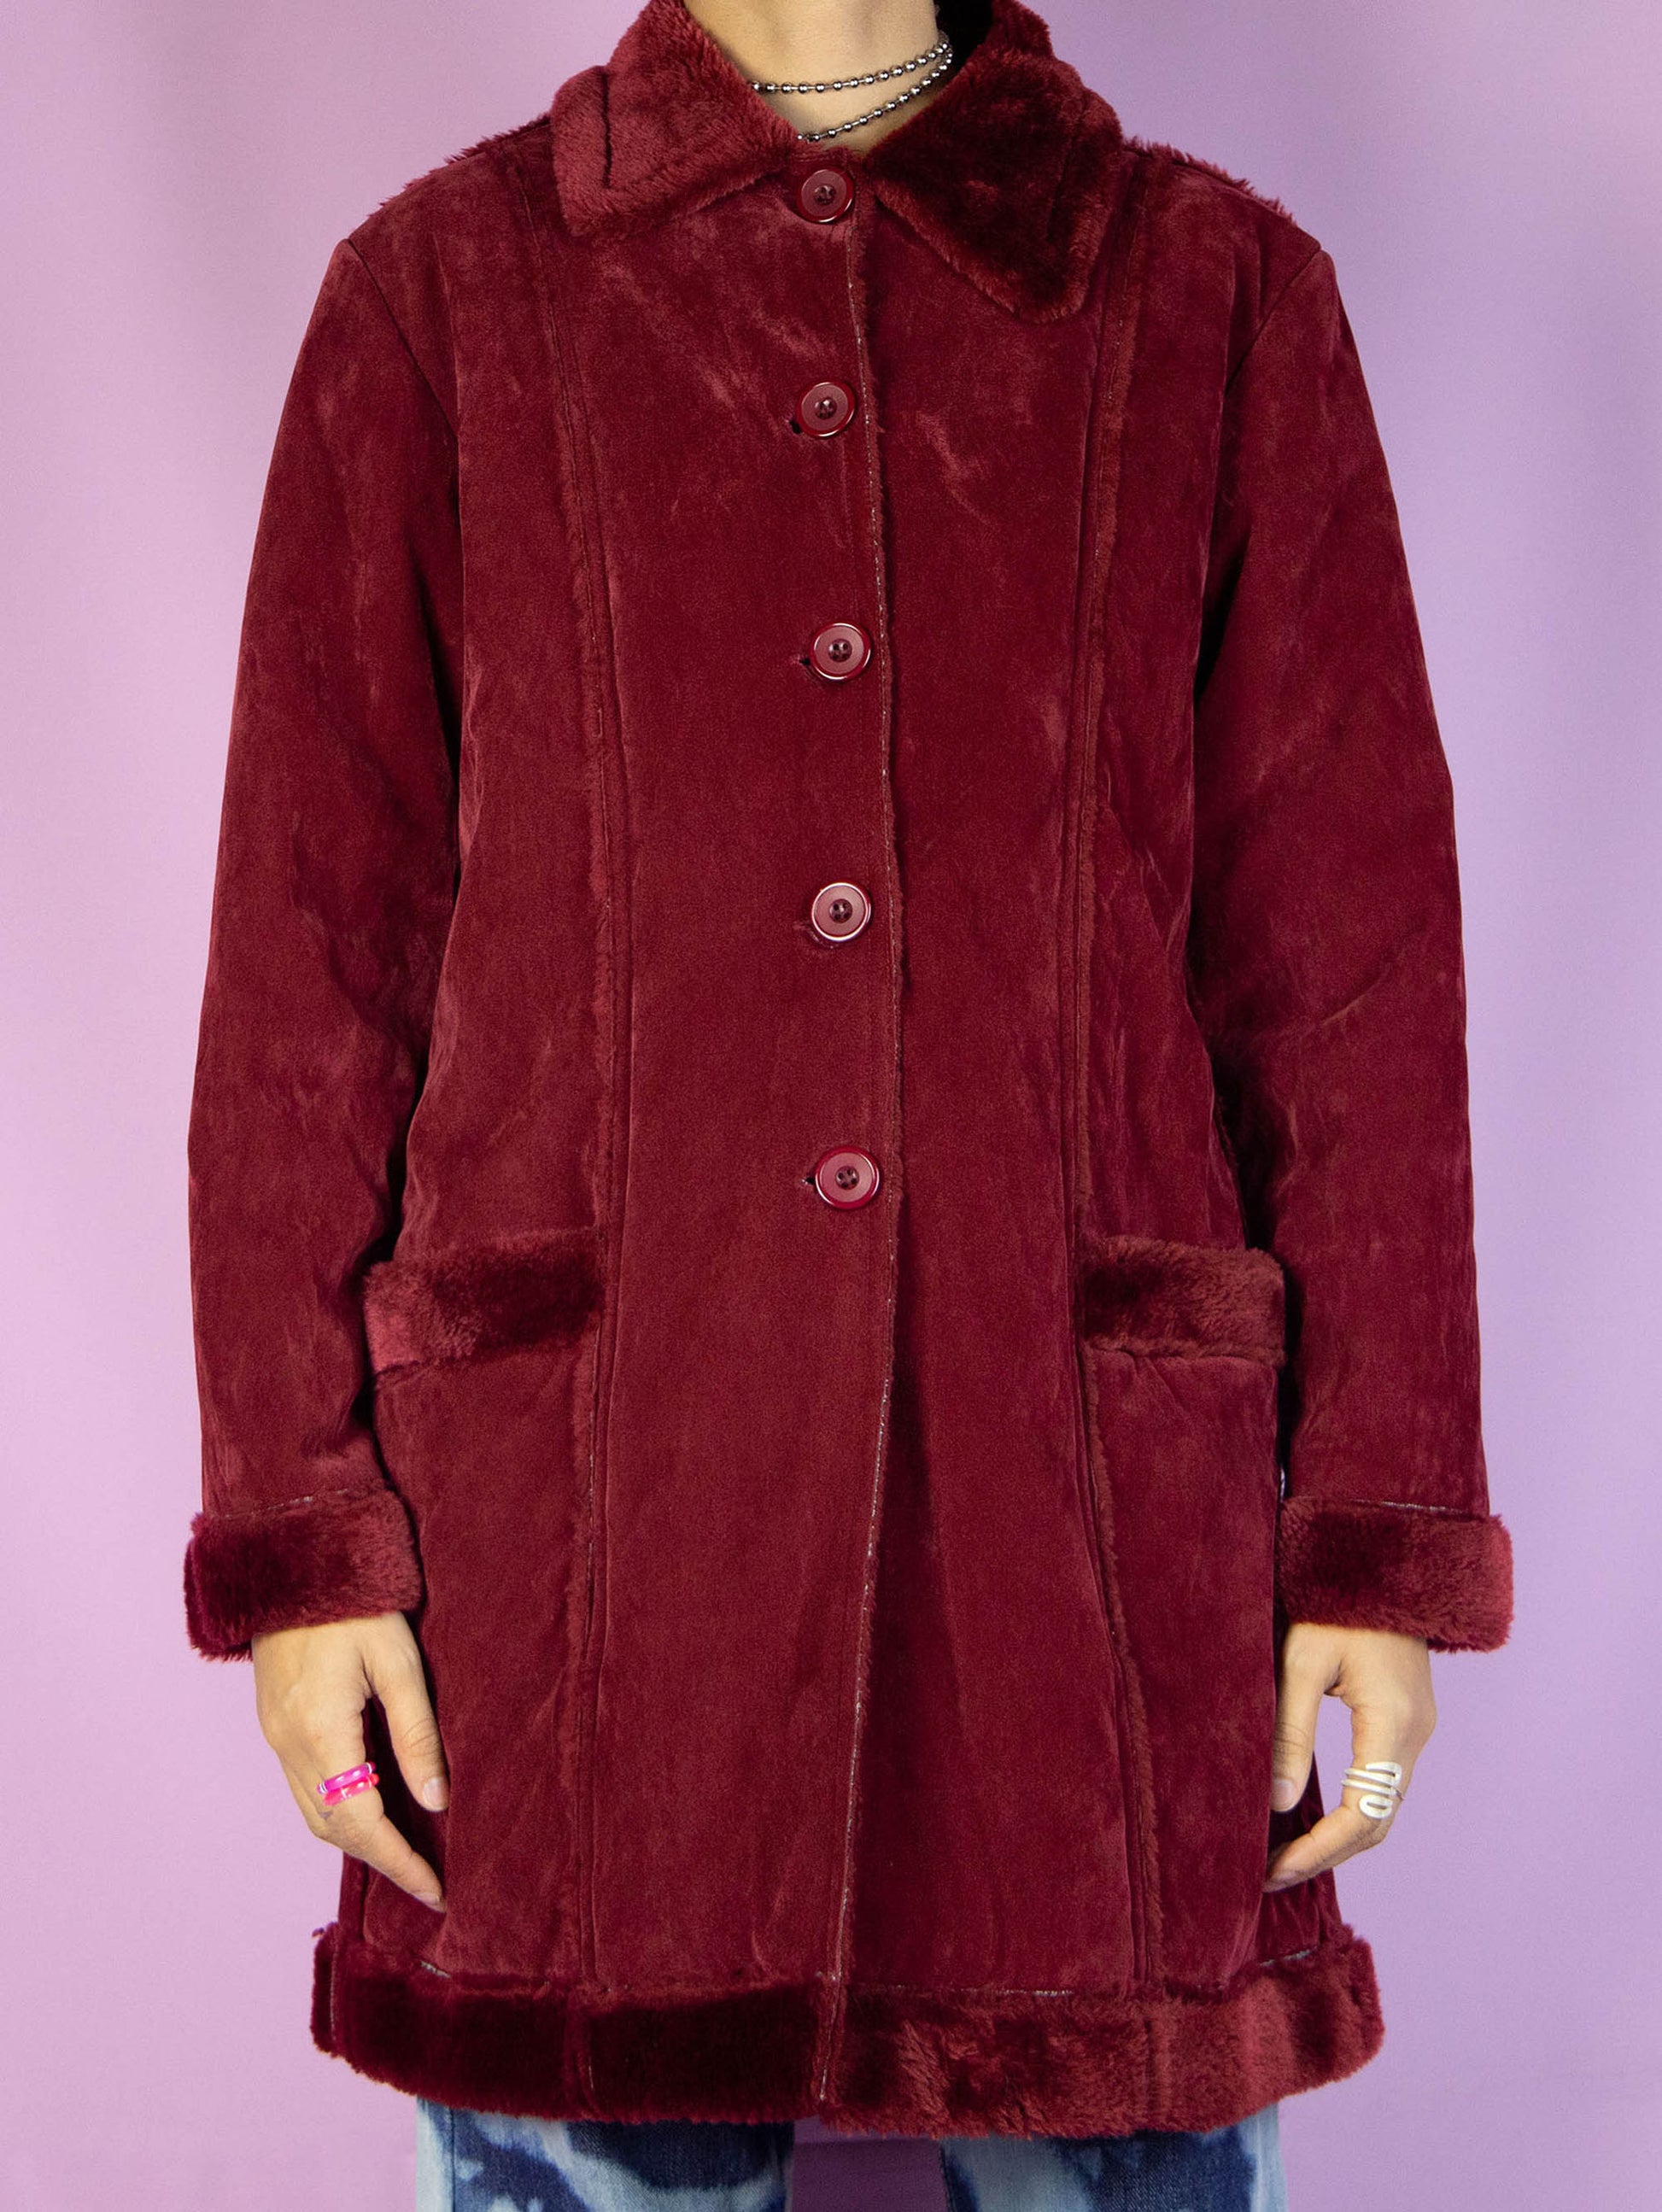 The Y2K Dark Red Faux Fur Coat is a vintage 2000s winter faux suede statement jacket with faux fur interior, collar, and cuffs, featuring pockets and a button closure.